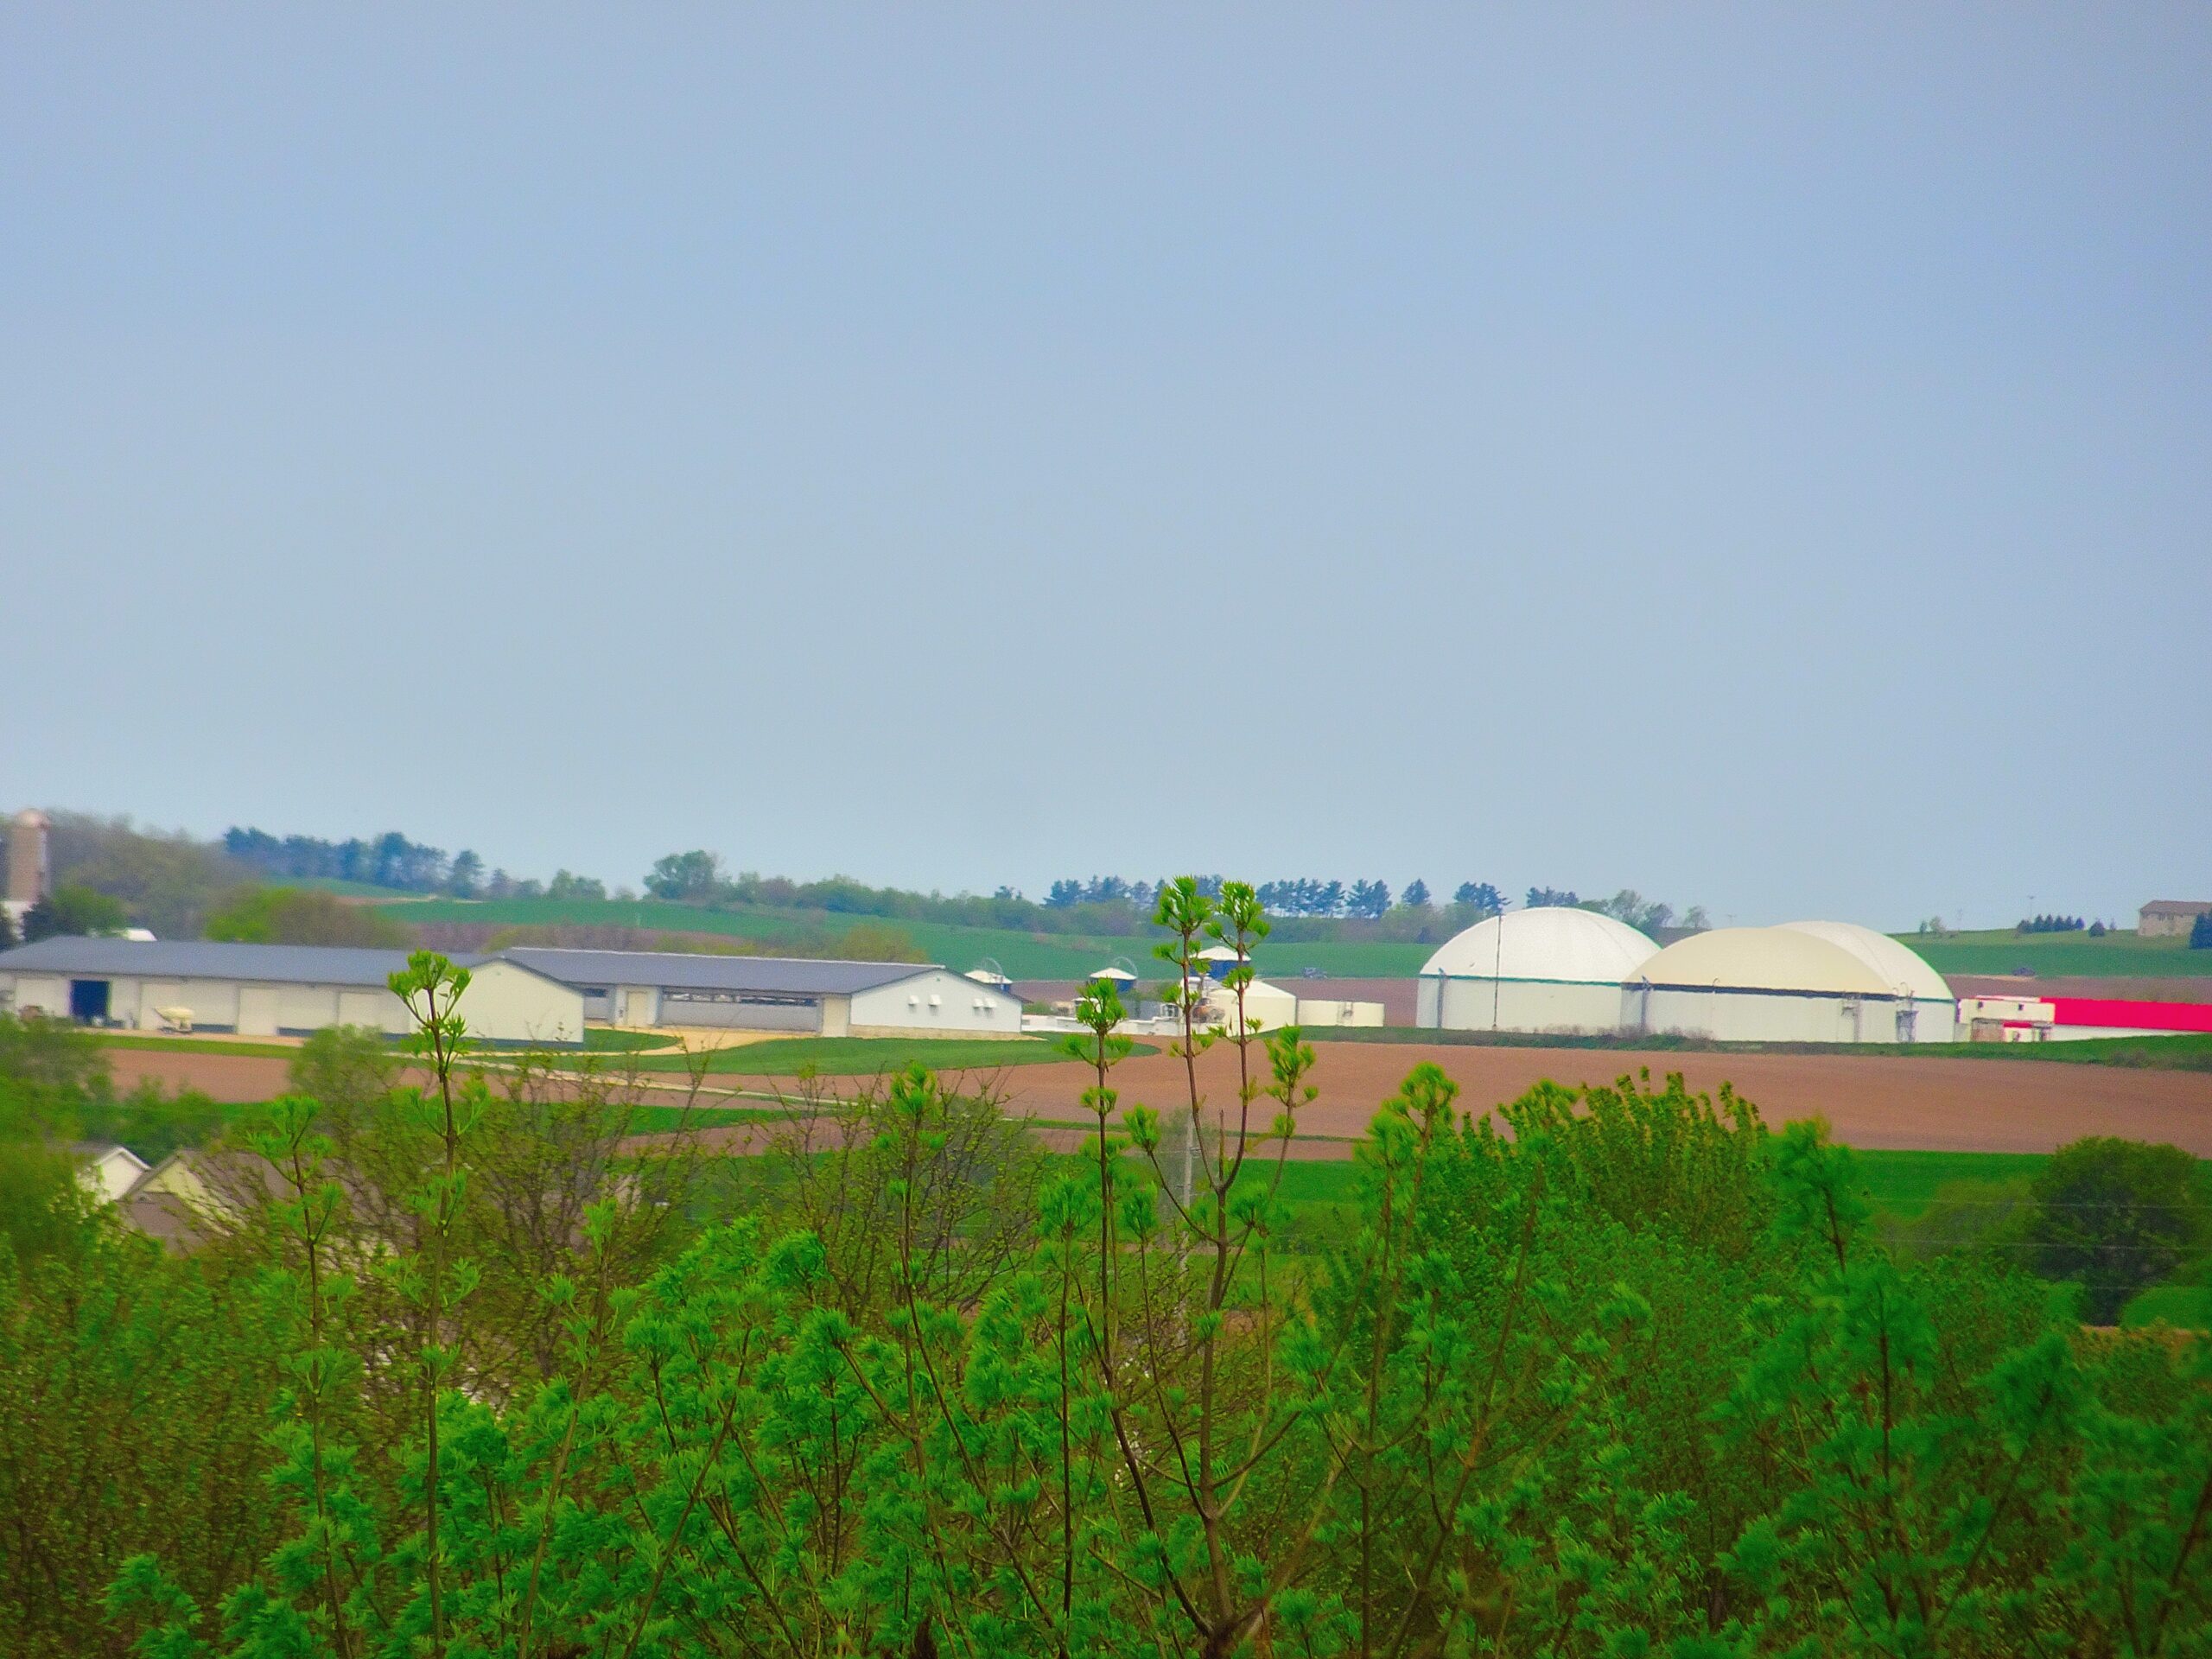 Manure digester north of Waunakee